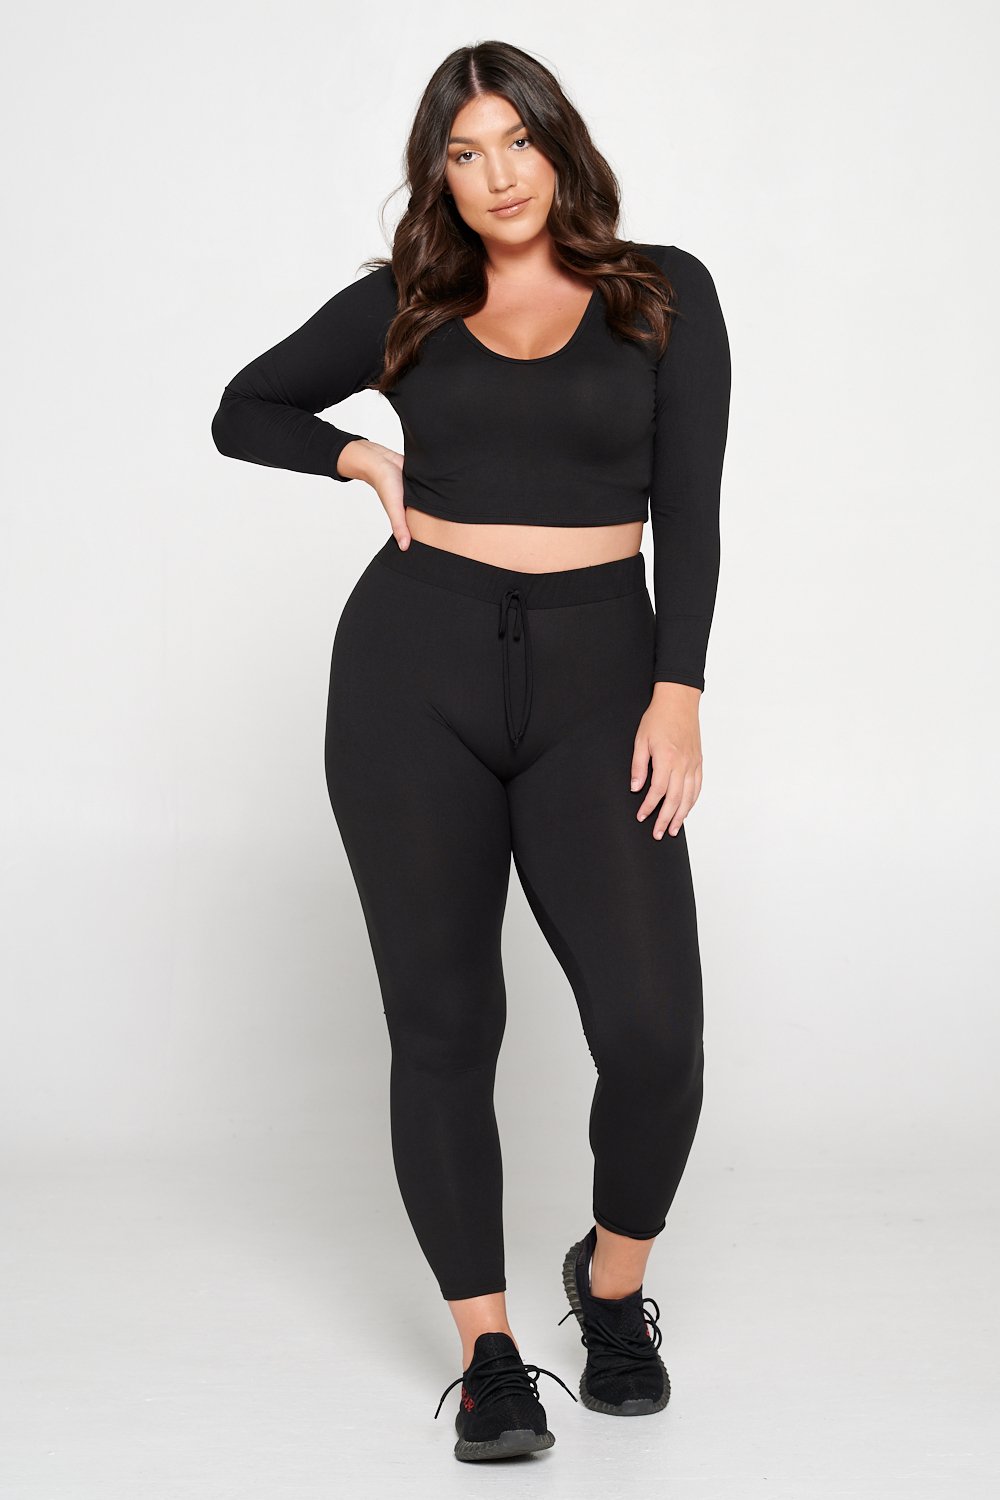 livd L I V D women's contemporary plus size  scoop neck crop hoodie and elastic band sweatpant with faux drawstring in black